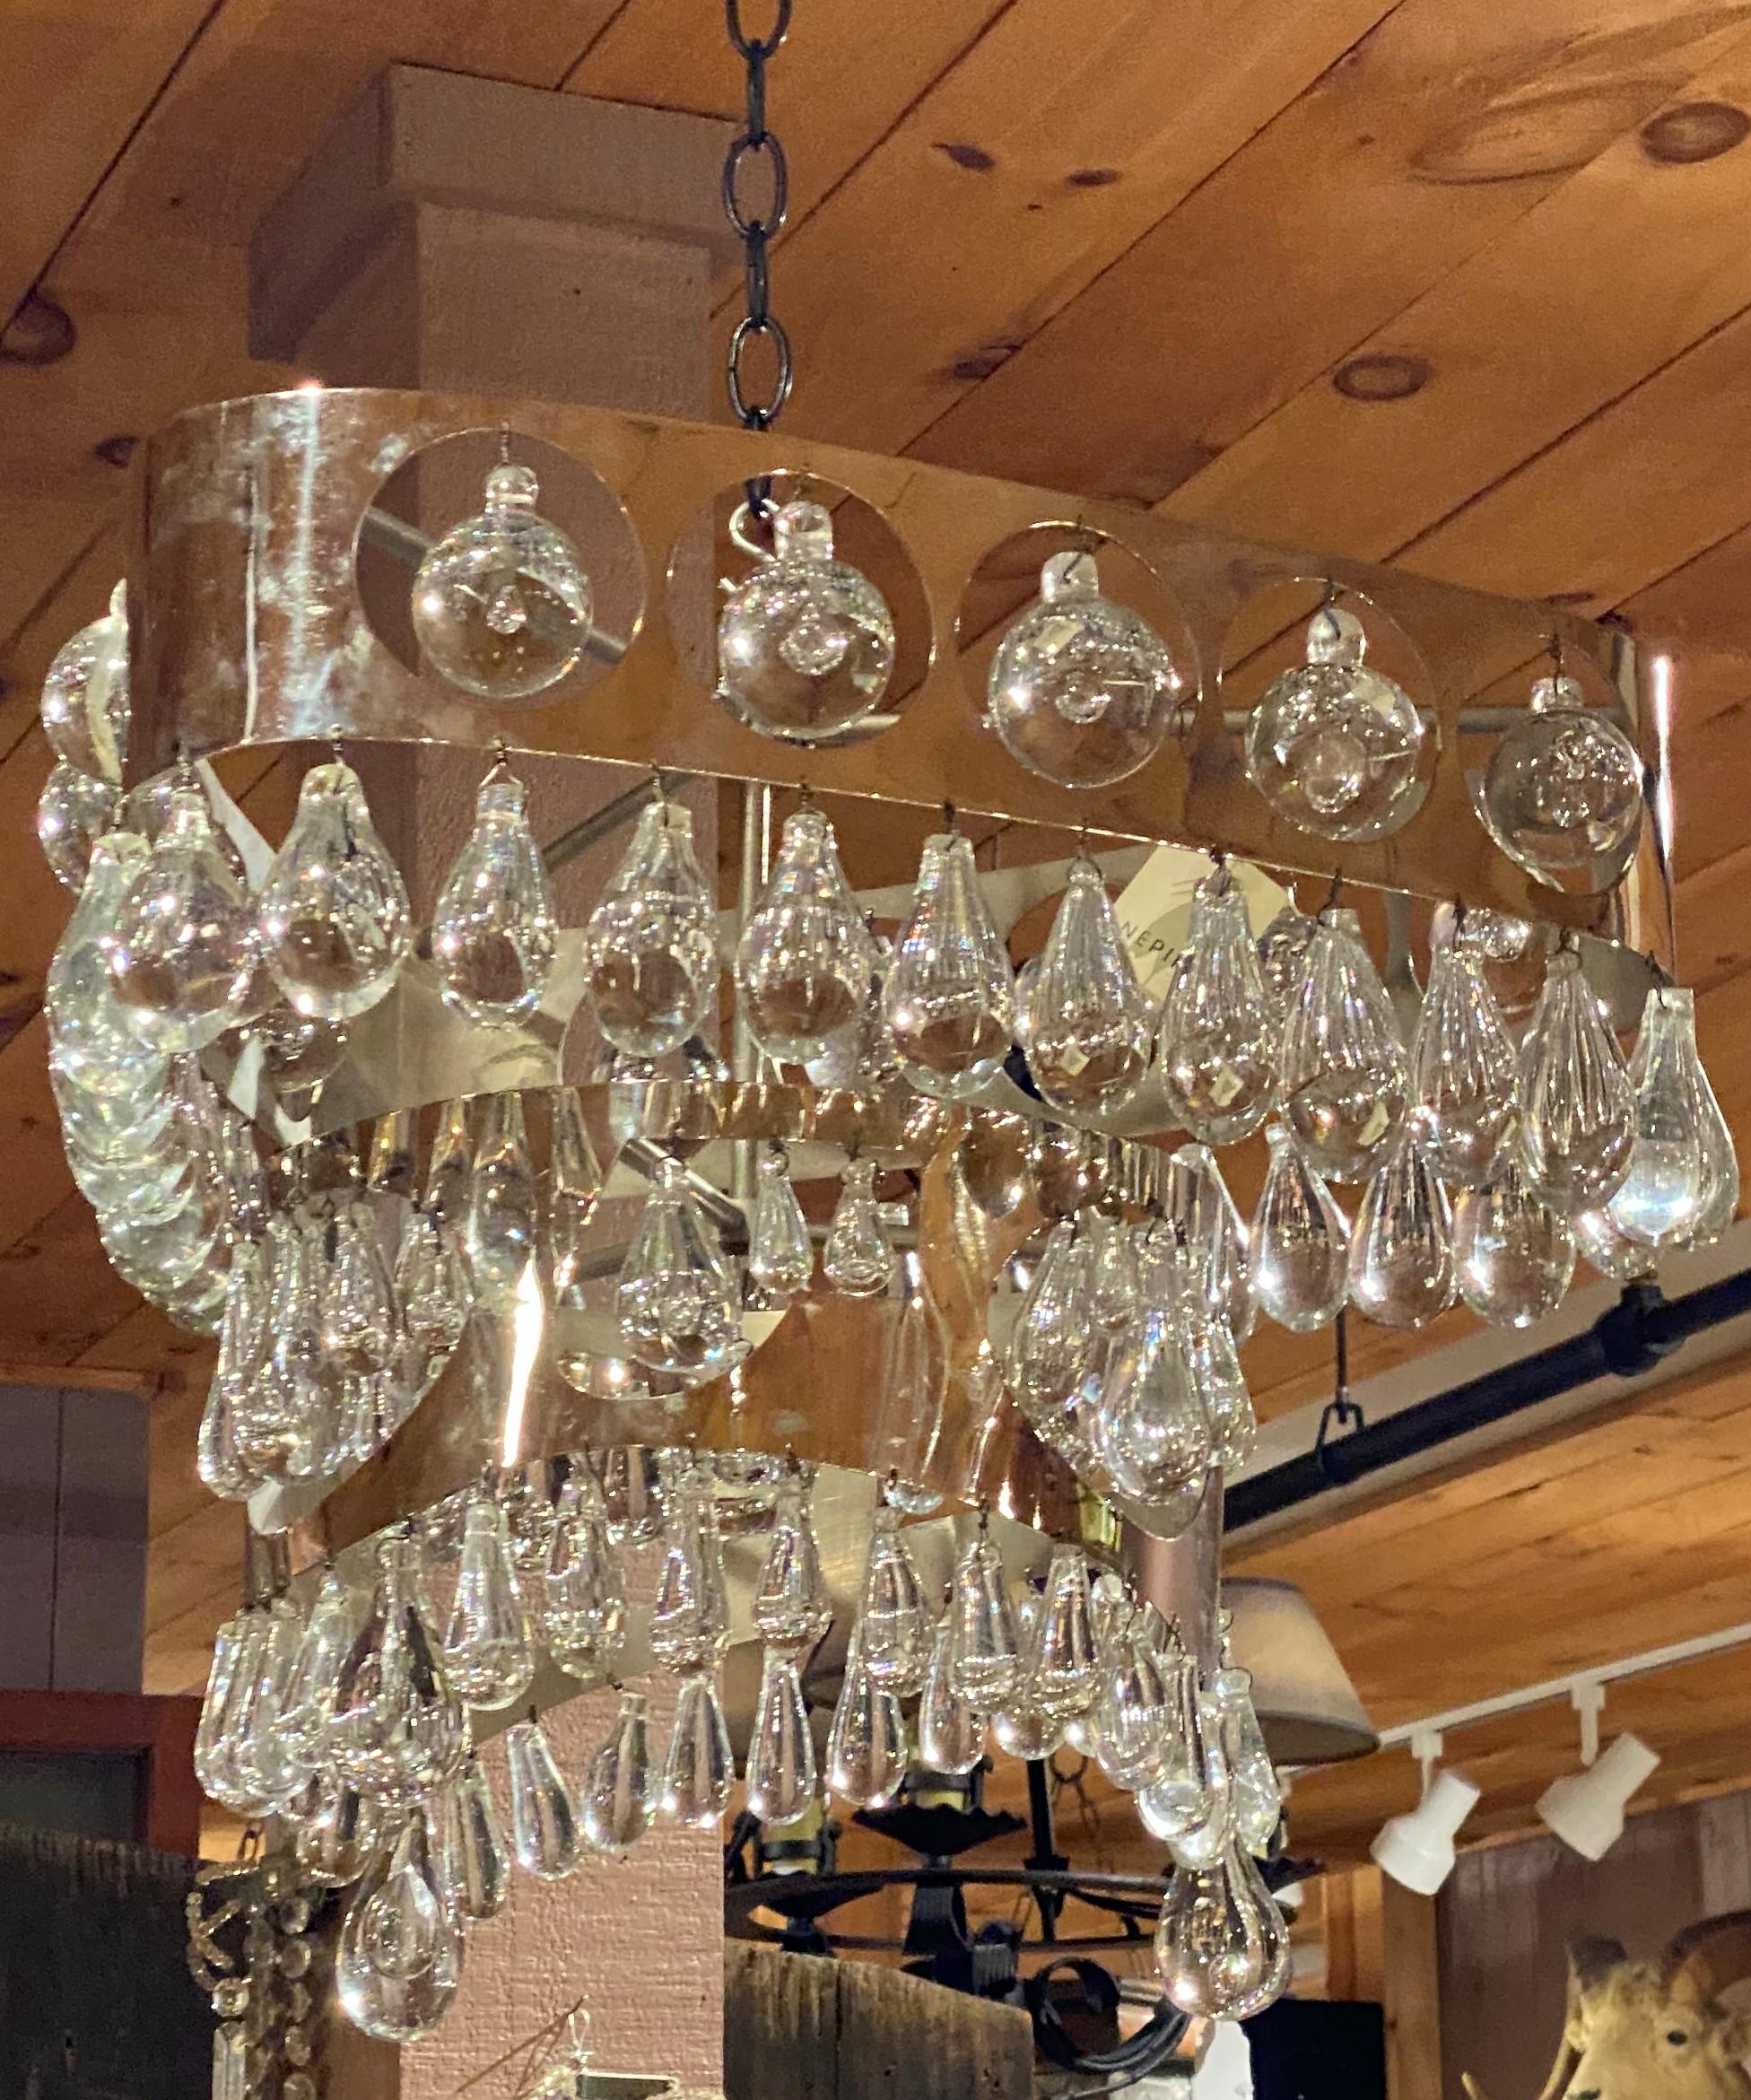 A fine mid-20th century designer chrome and crystal two-tier chandelier by Nepir Portugal in the Art Deco style with triangle top tier and round lower tier, each adorned with solid round bubble glass pendants, as well as smaller teardrop pendants.